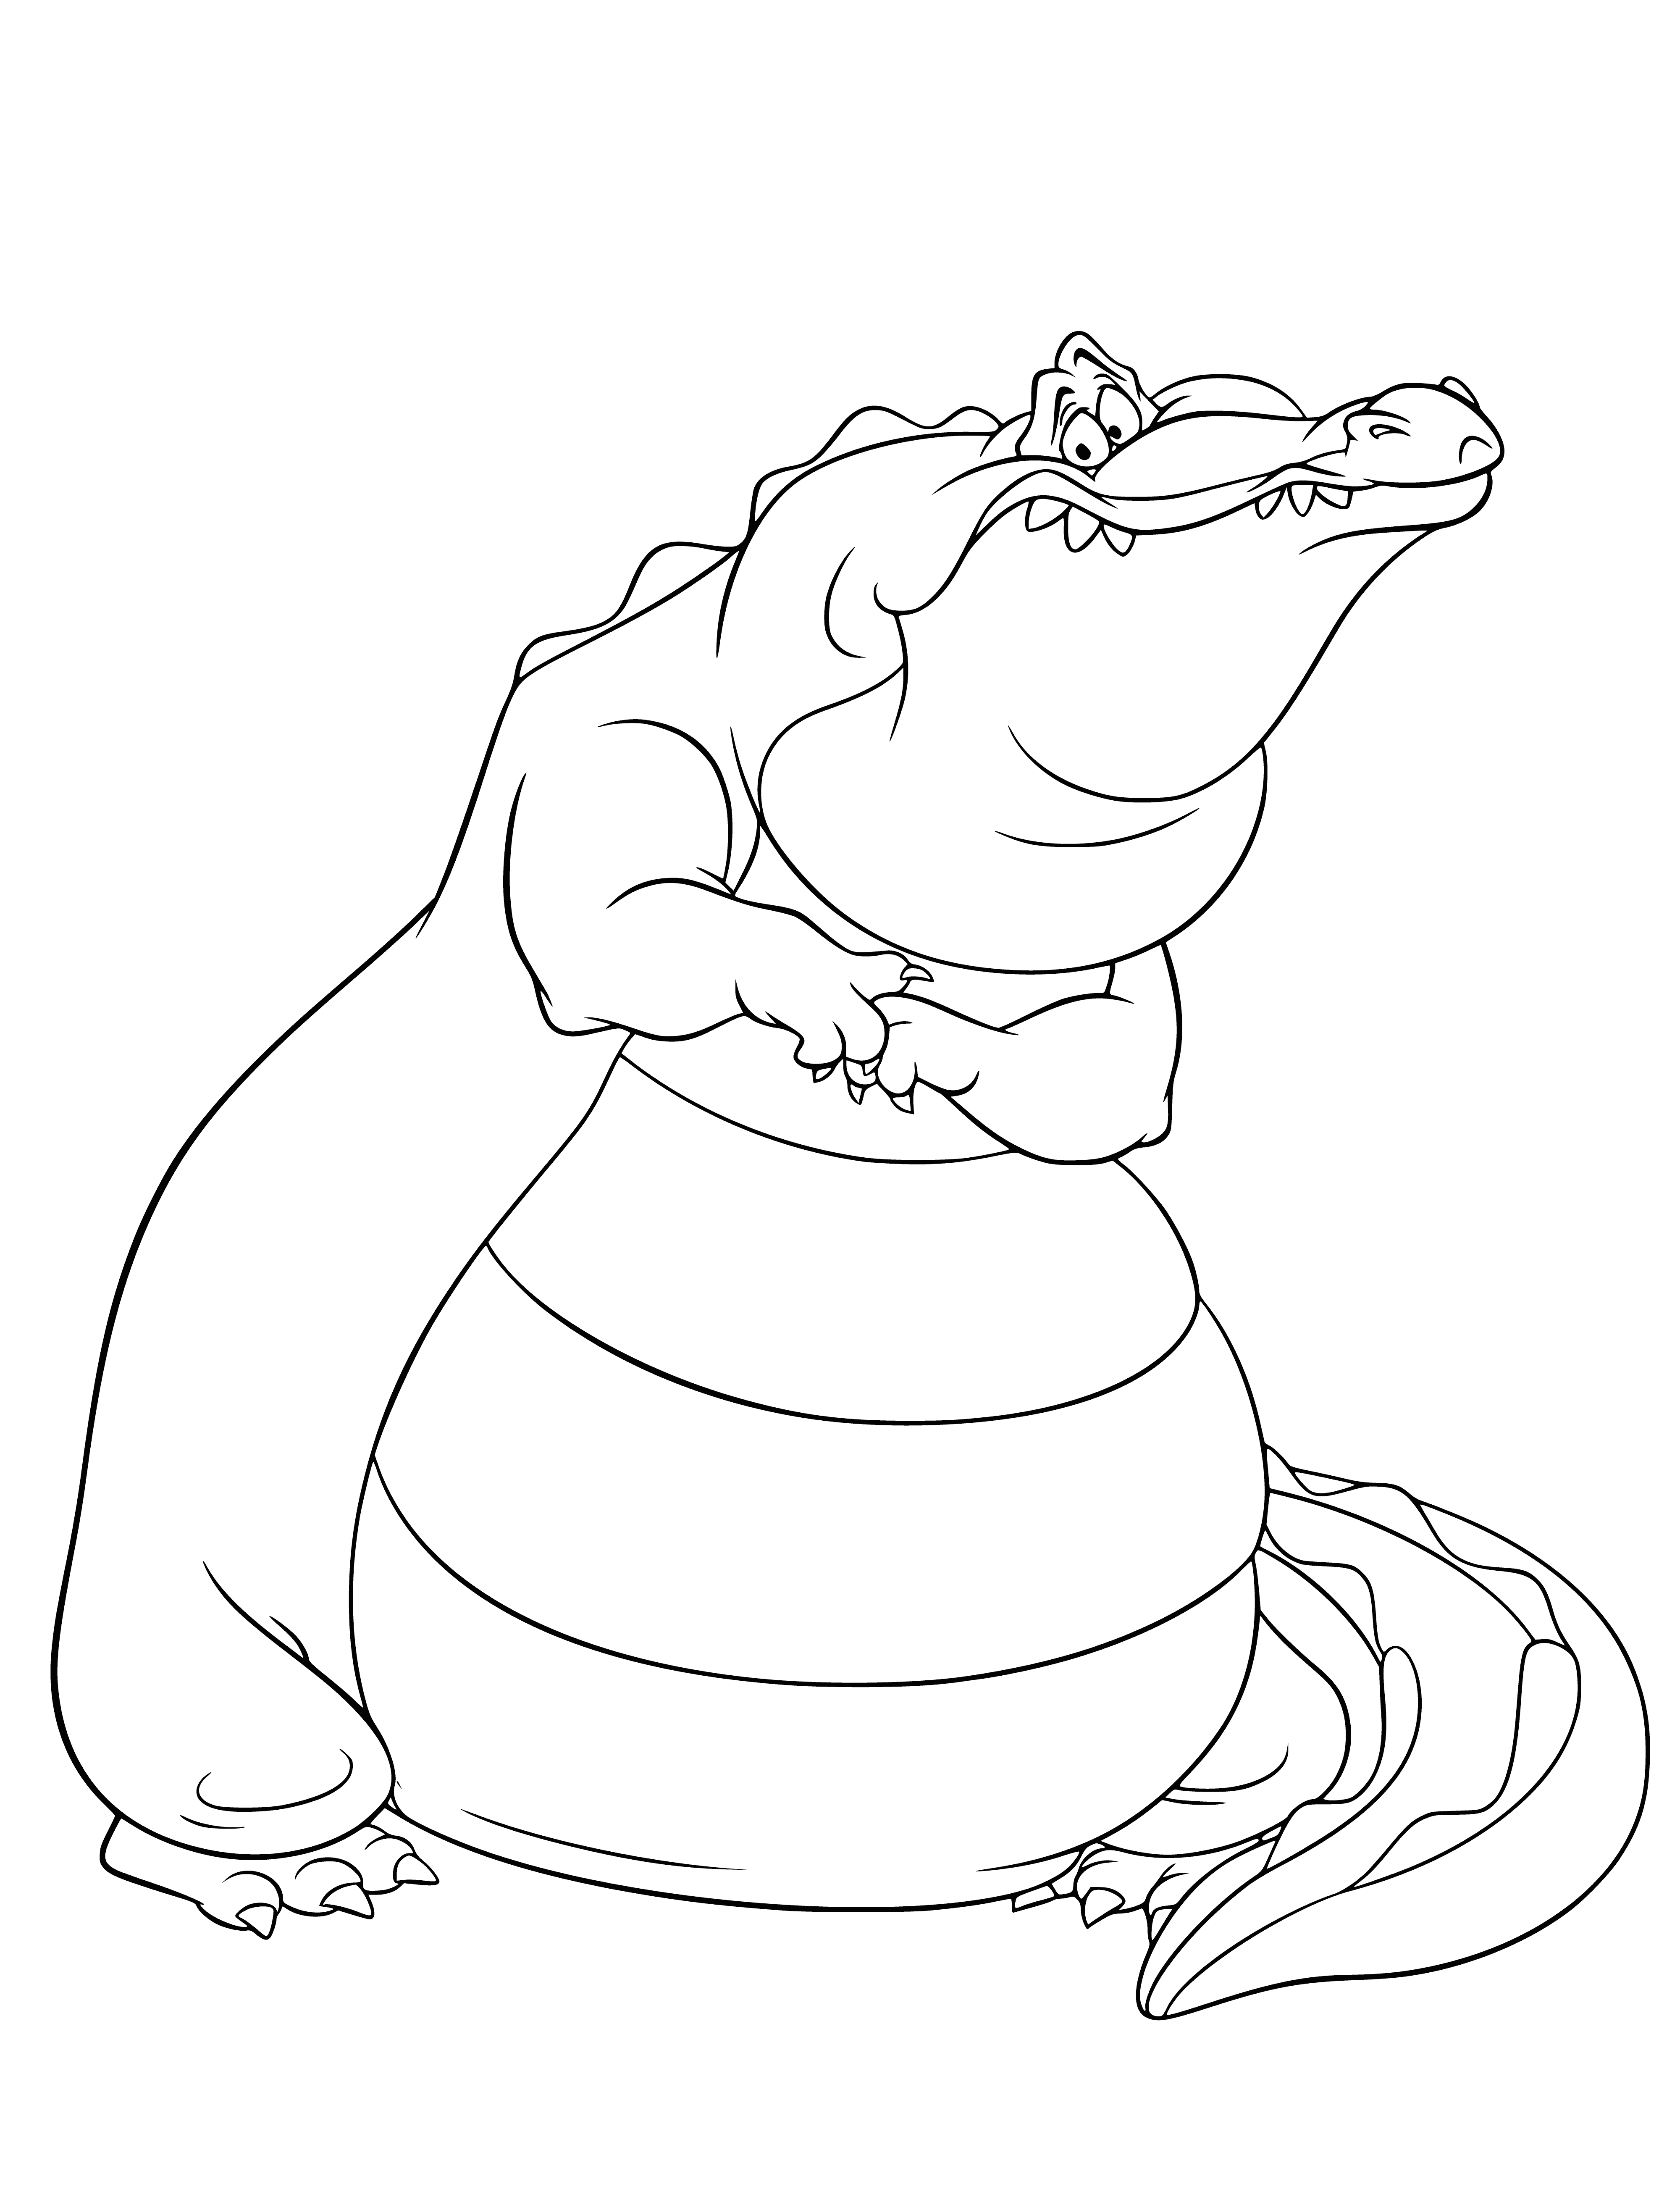 coloring page: An alligator plays trumpet in a band, wearing a purple bowtie and a yellow handkerchief.